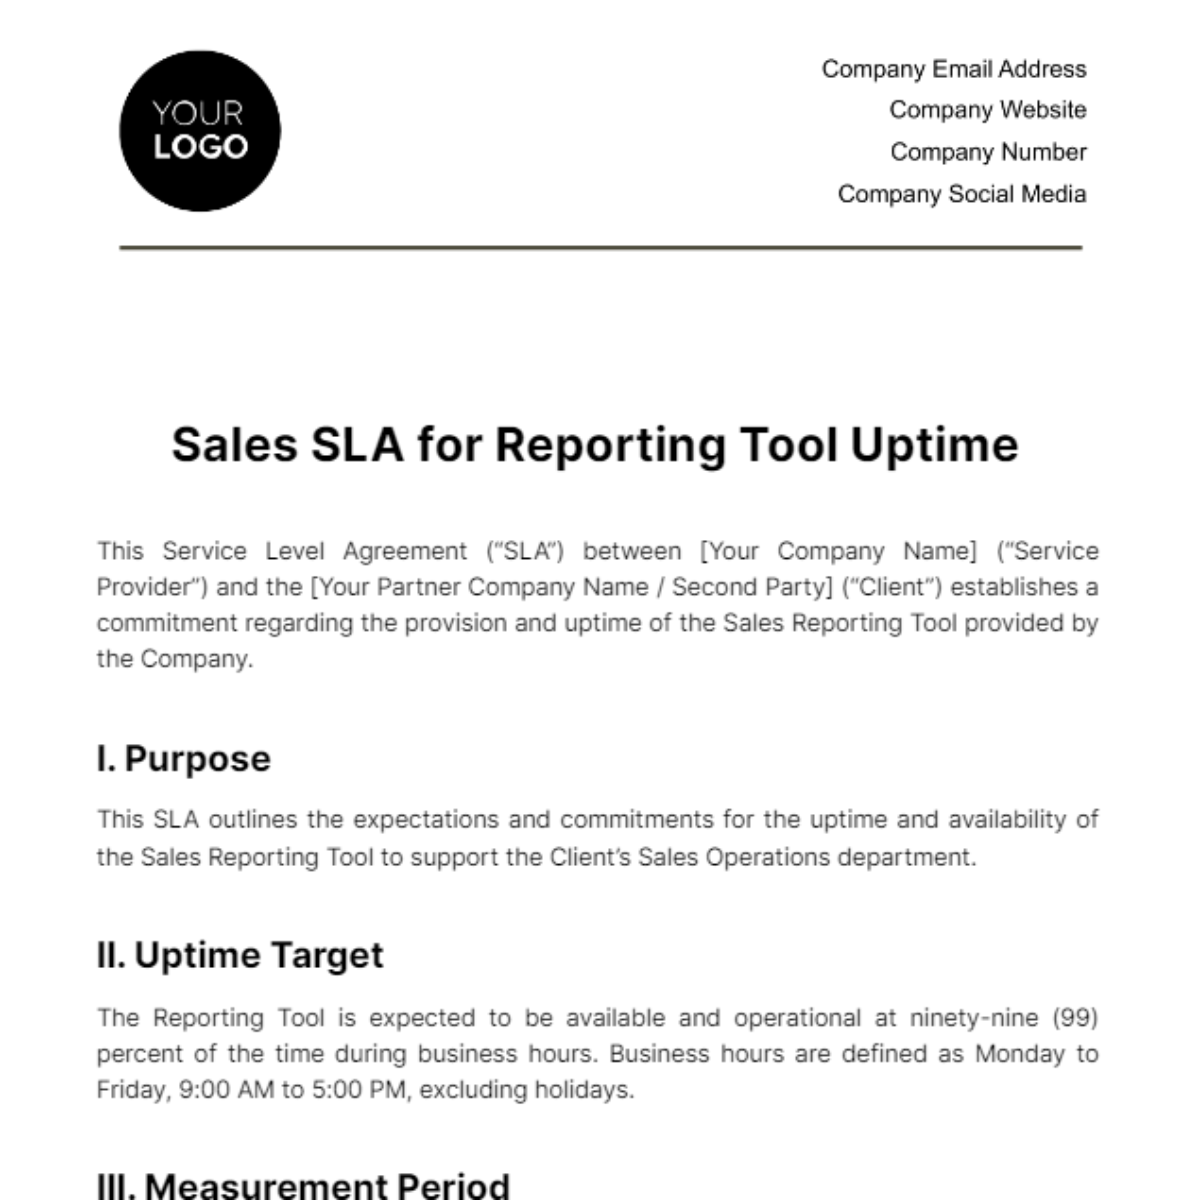 Free Sales SLA for Reporting Tool Uptime Template